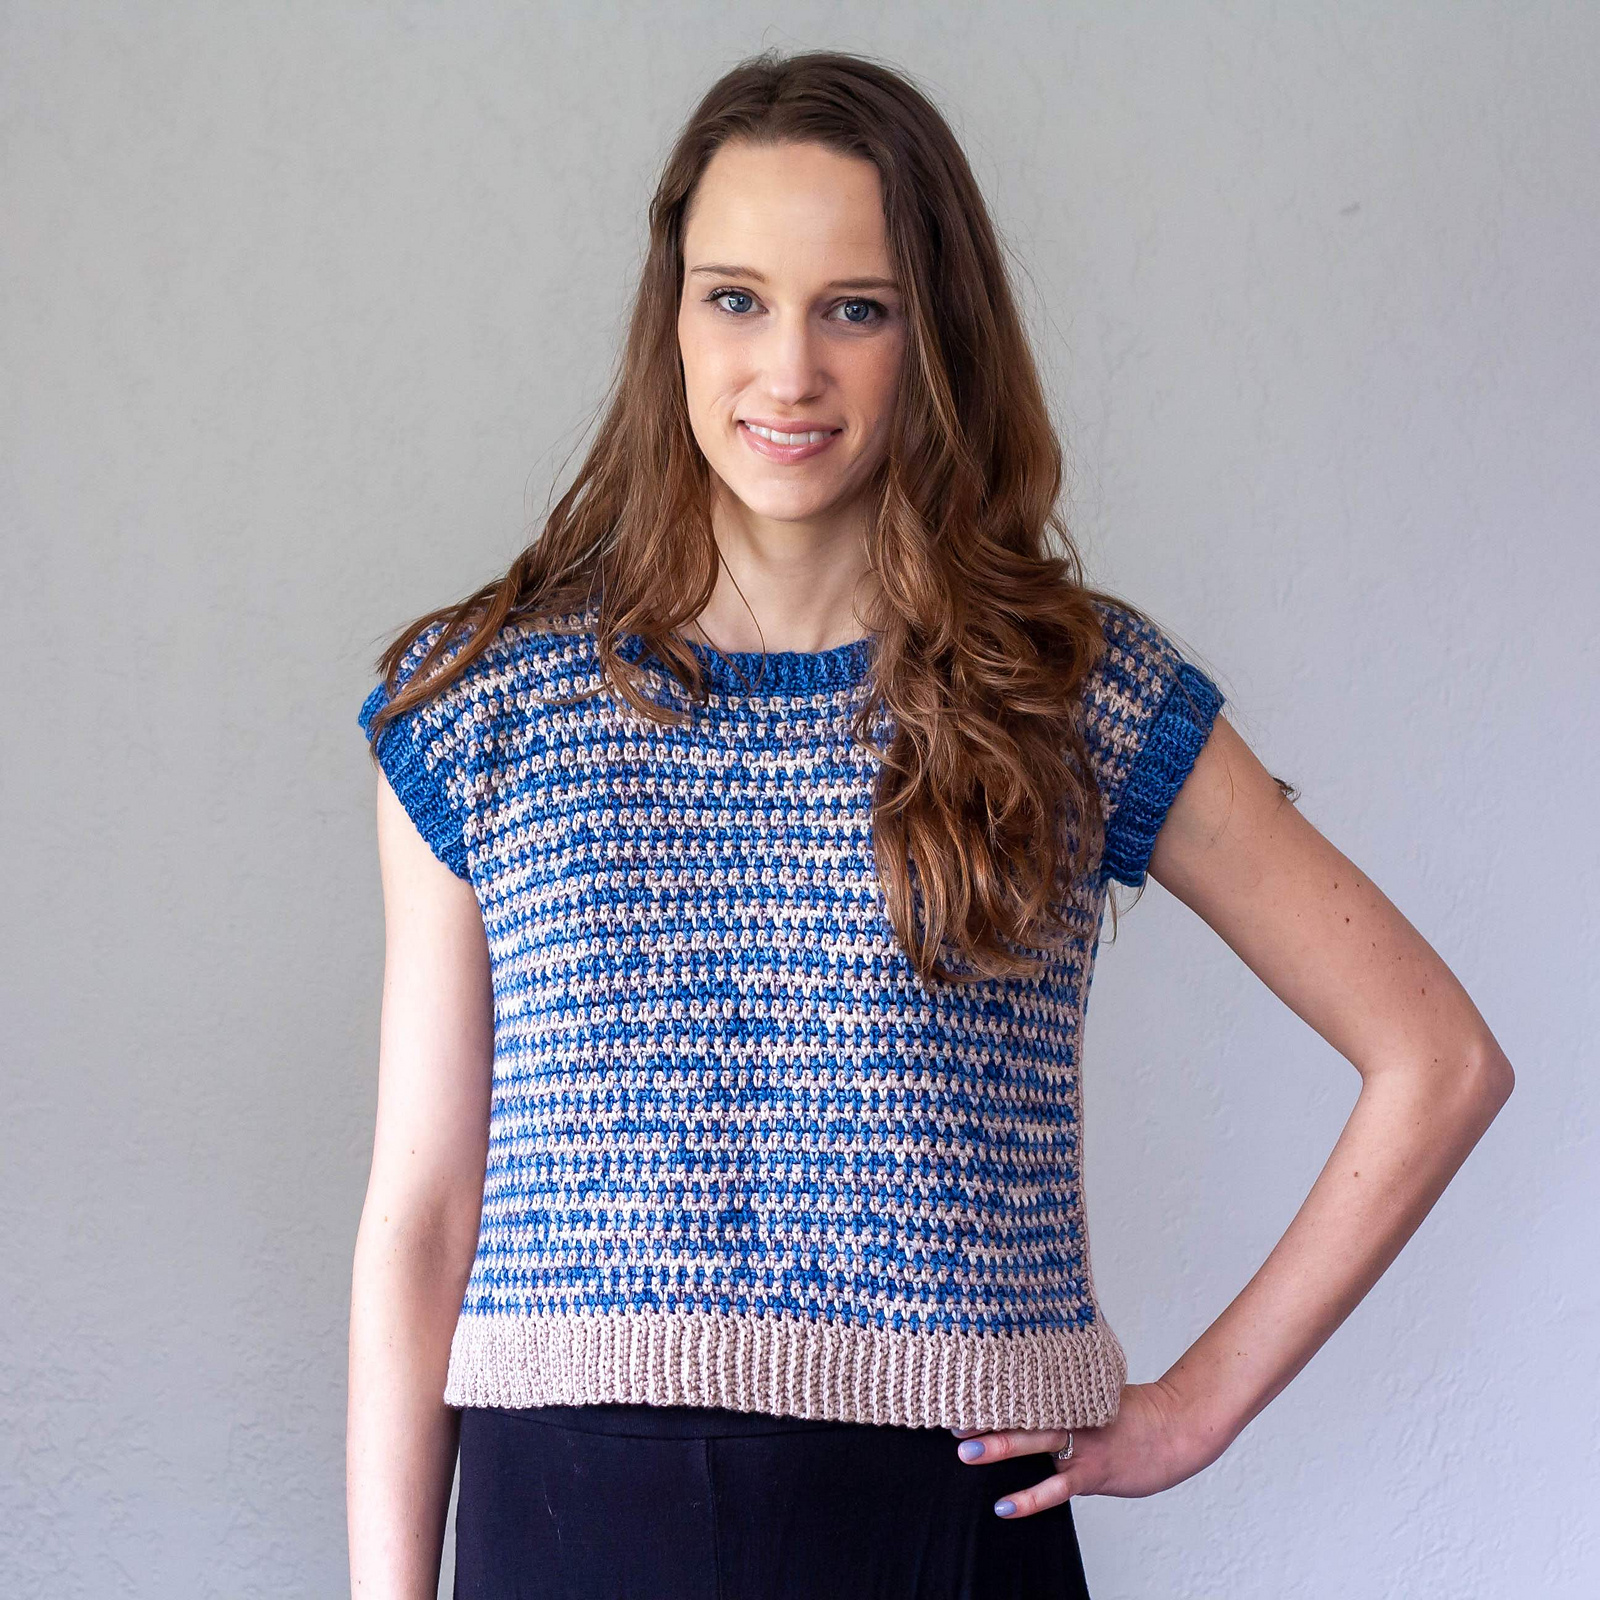 Cool and Cute Crochet Top Pattern For Women - Evelyn's World! My Dreams ...